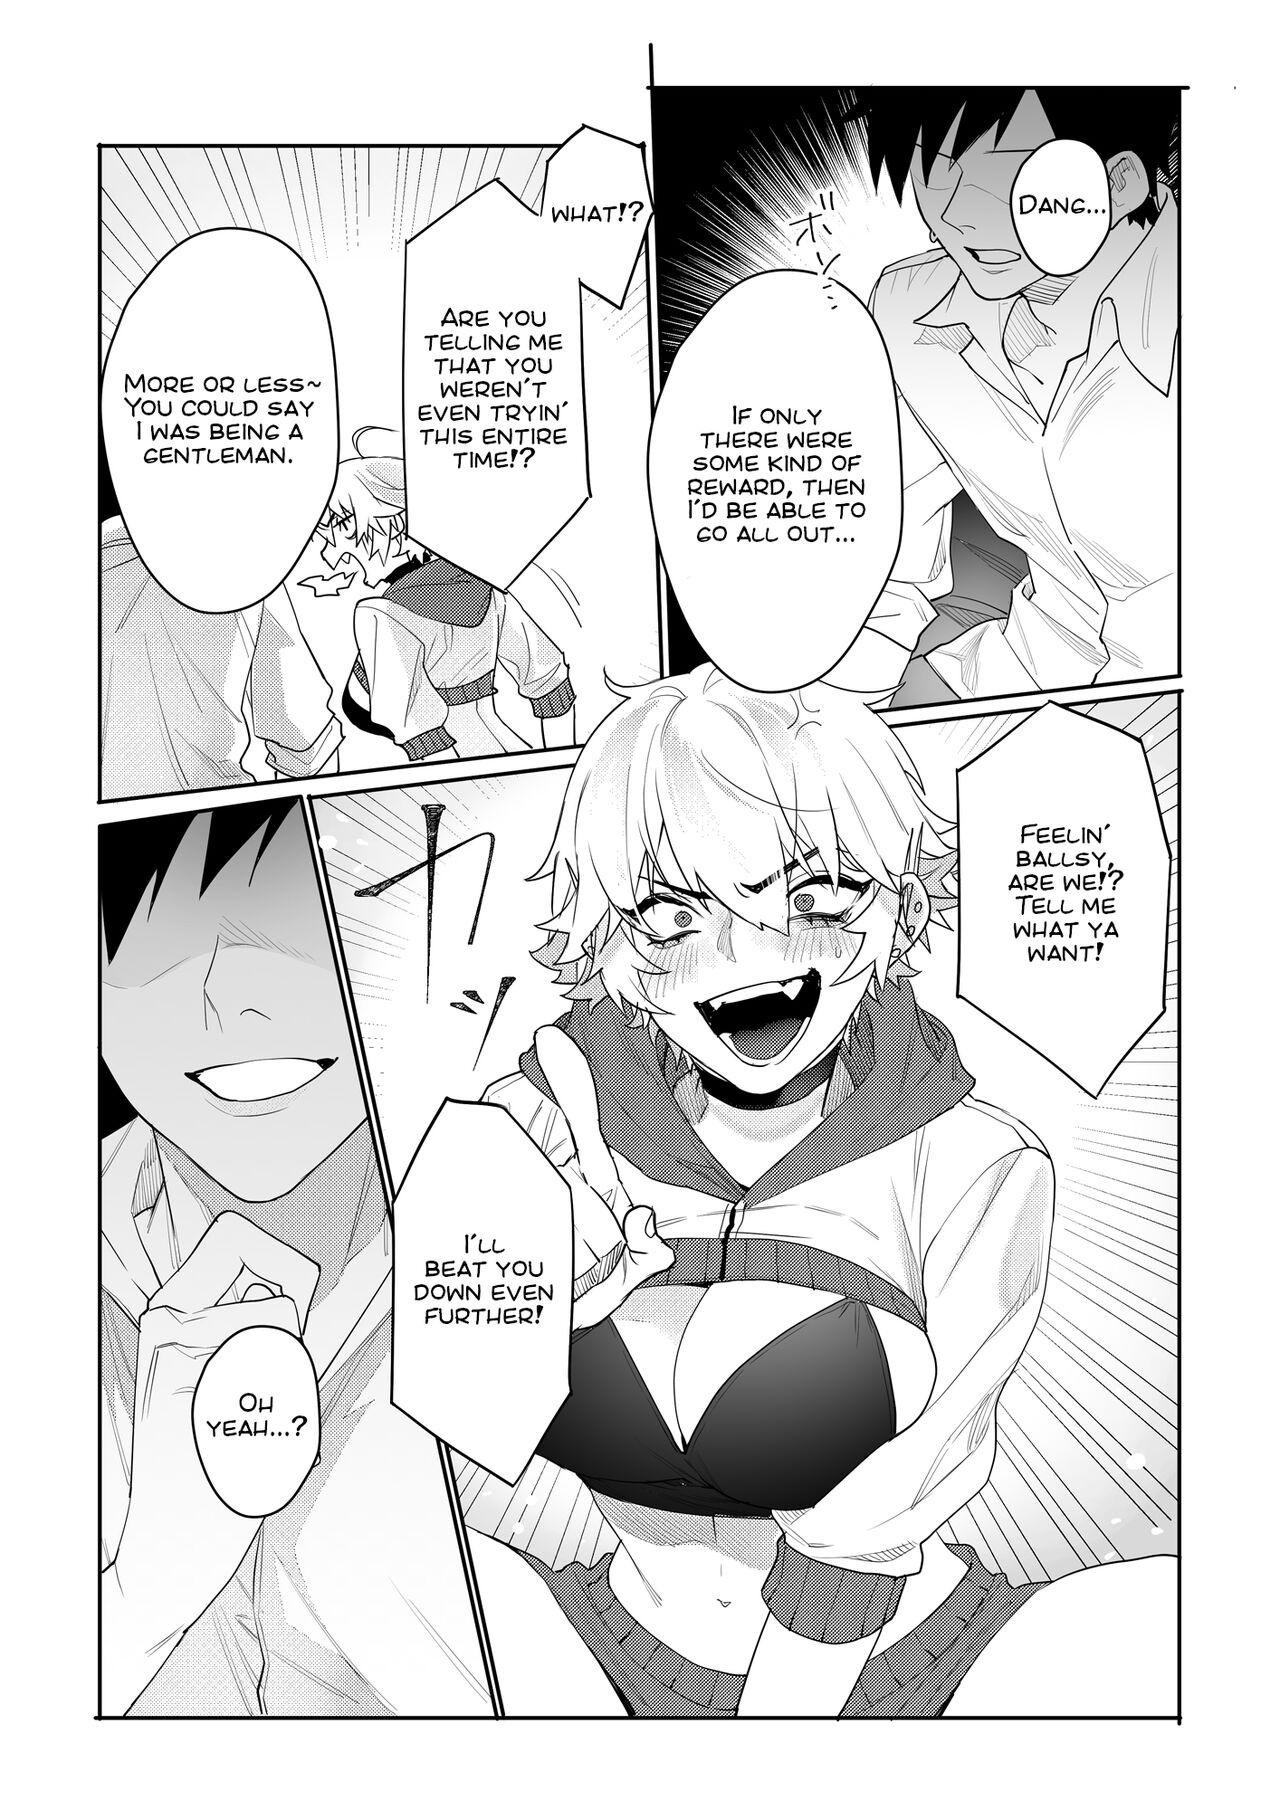 Chick Gamer kanojo no oppai monde mita kekka… | What Happens if You Try to Fondle a Gamer Chick's Boobs... - Original Black Dick - Page 7